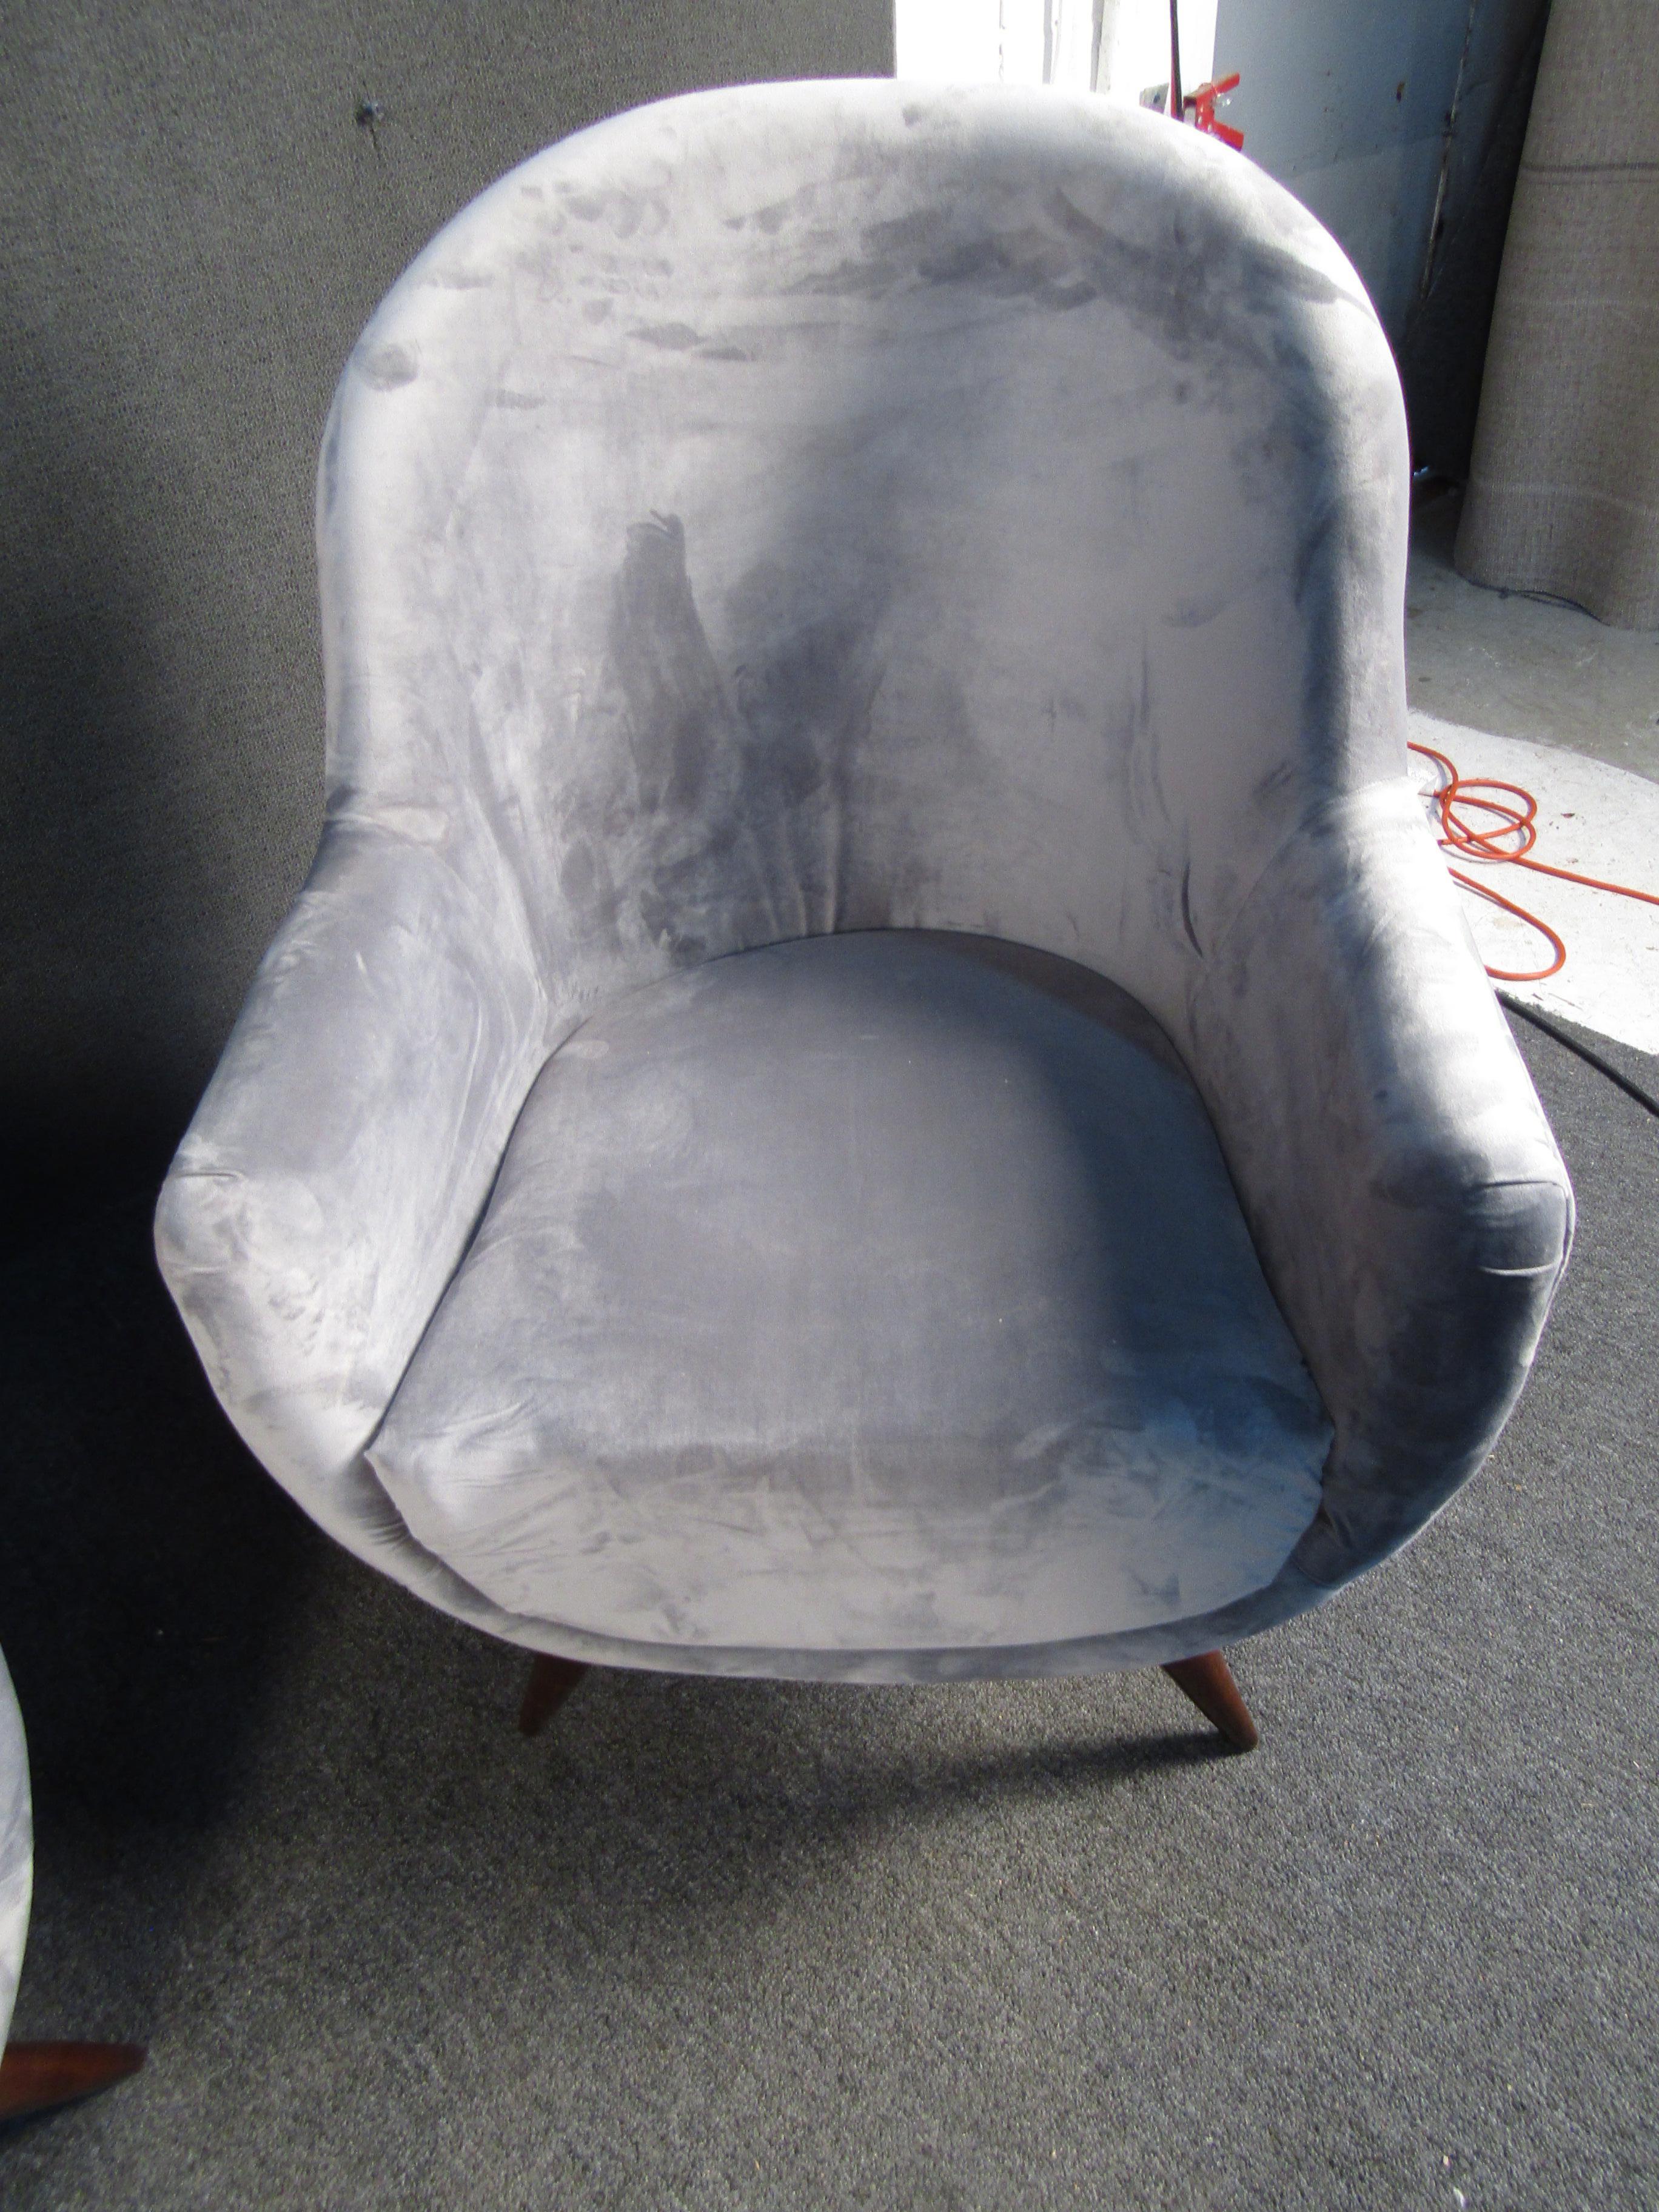 Late 20th Century Mid-Century Modern Lounge Chairs For Sale